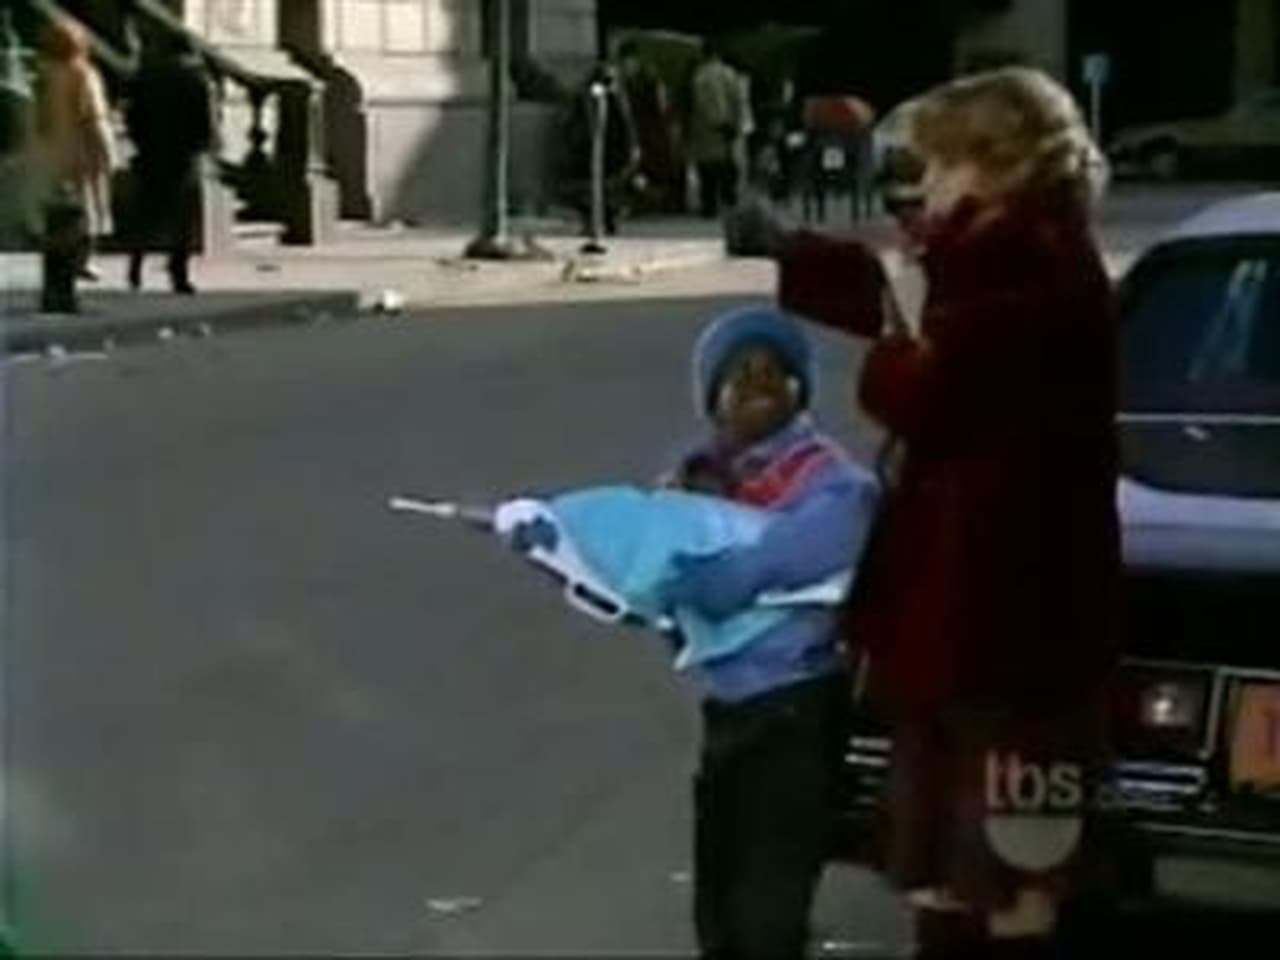 Diff'rent Strokes - Season 6 Episode 14 : The Hitchhikers (1) (a.k.a.) Hitchhiking (1)